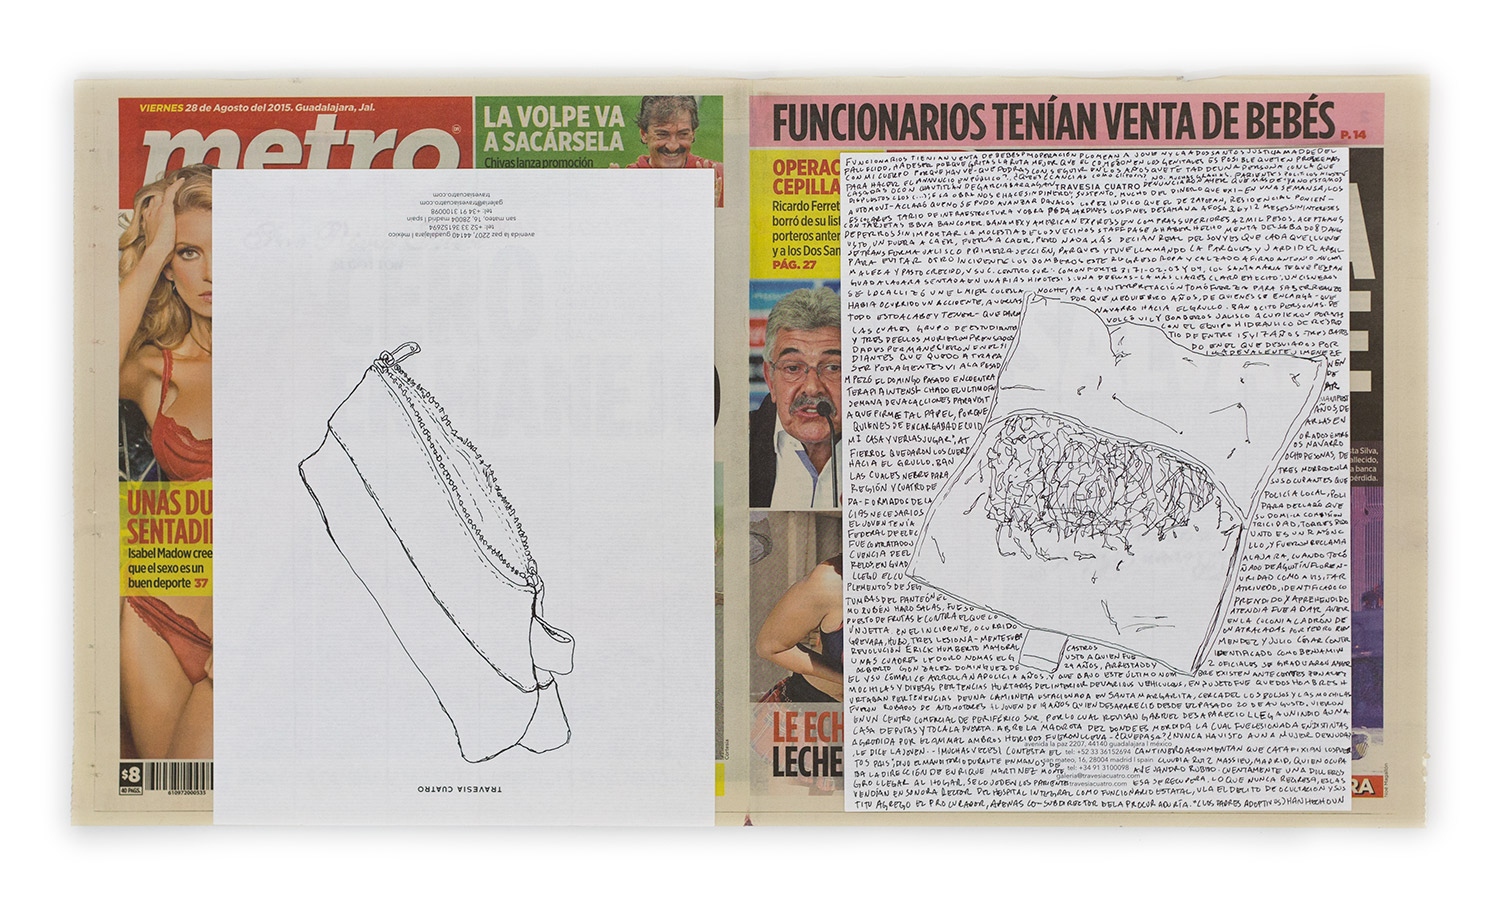   Political Drawing (Metro: Guadalajara, Mexico, Viernes 28 Agosto 2015)   2015  Ink on paper, daily newspaper  12 1/2 x 22 3/4 inches   Drawings, 2014–    Disponibles, 2015     